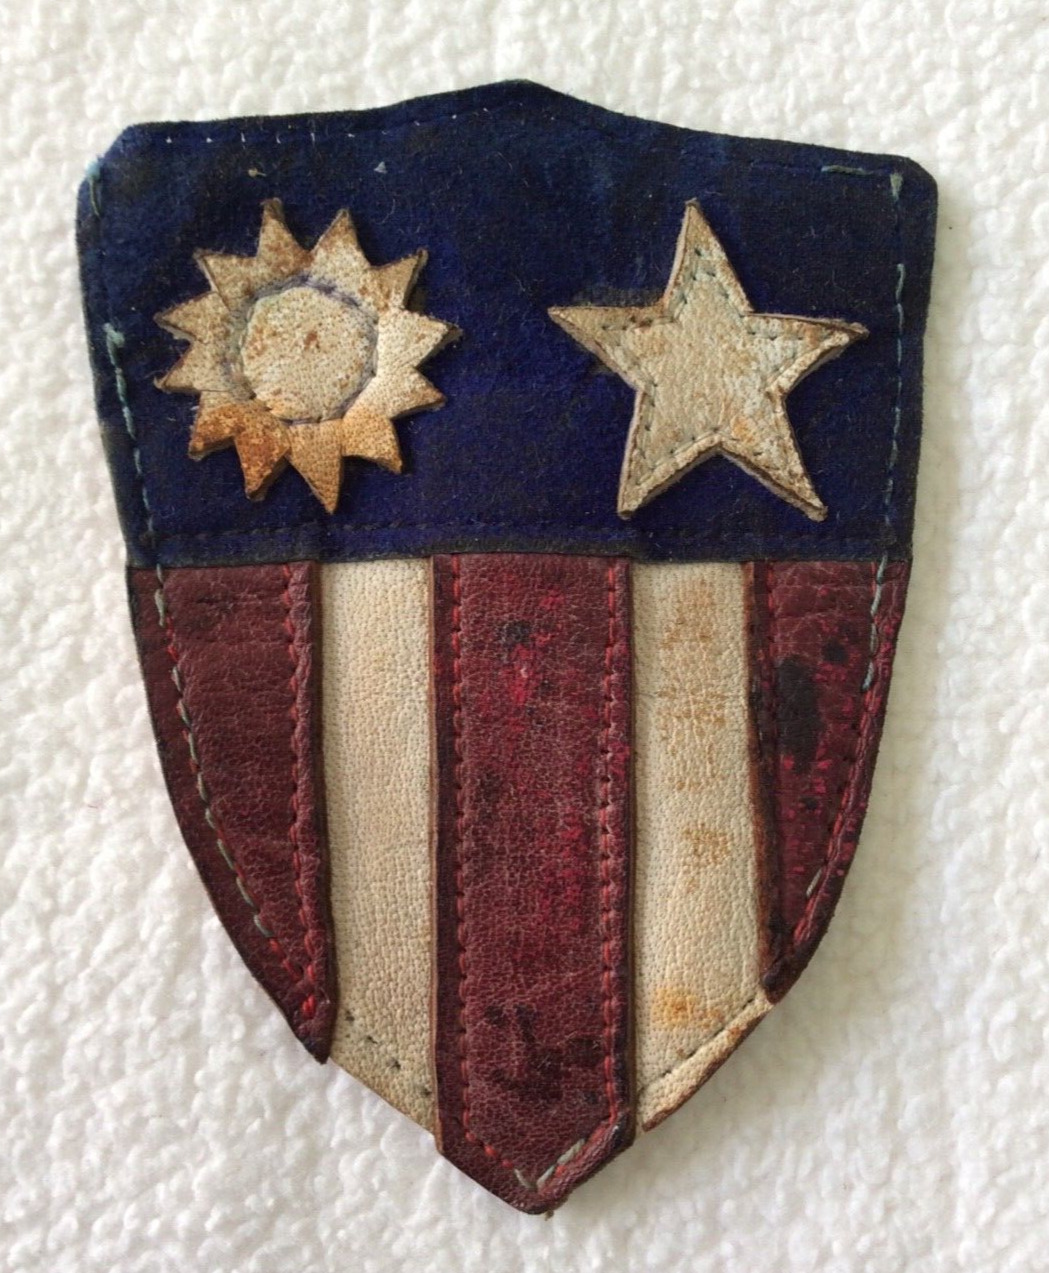 Vintage WWII US Army CBI China Burma India theatre leather patch - Issued worn